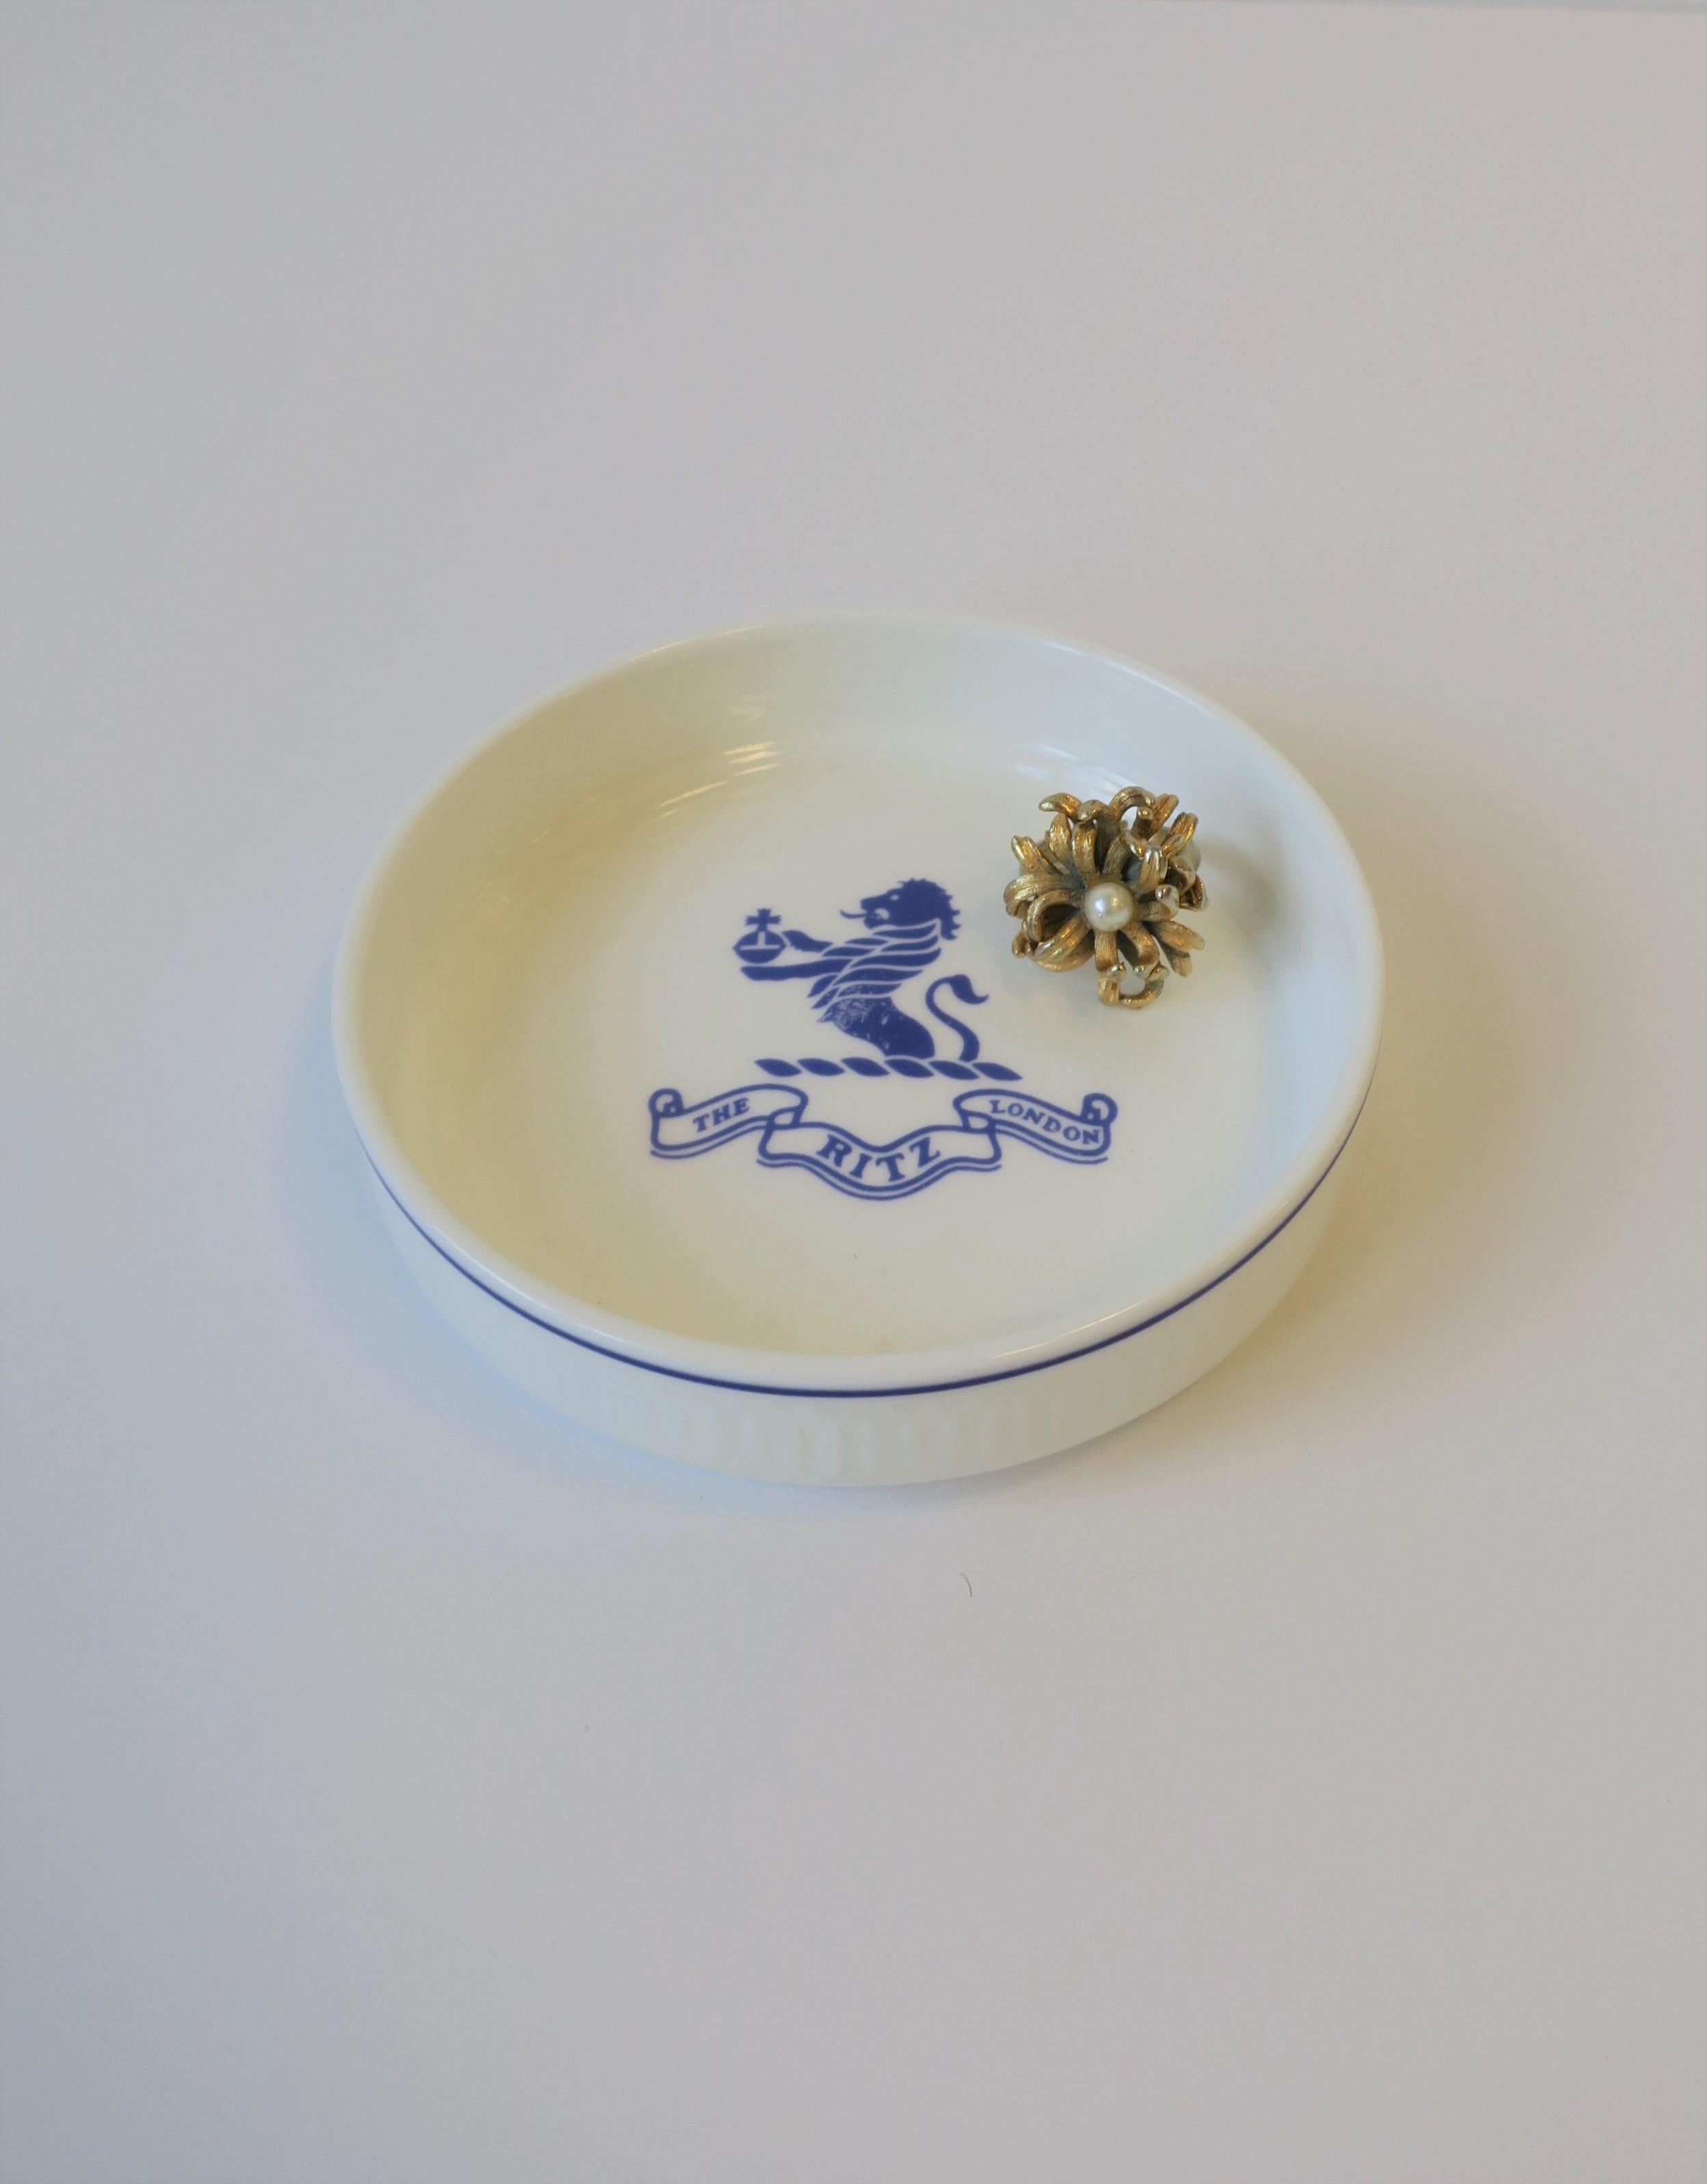 The Ritz Hotel London Blue and White Porcelain Jewelry Dish by Royal Doulton 2